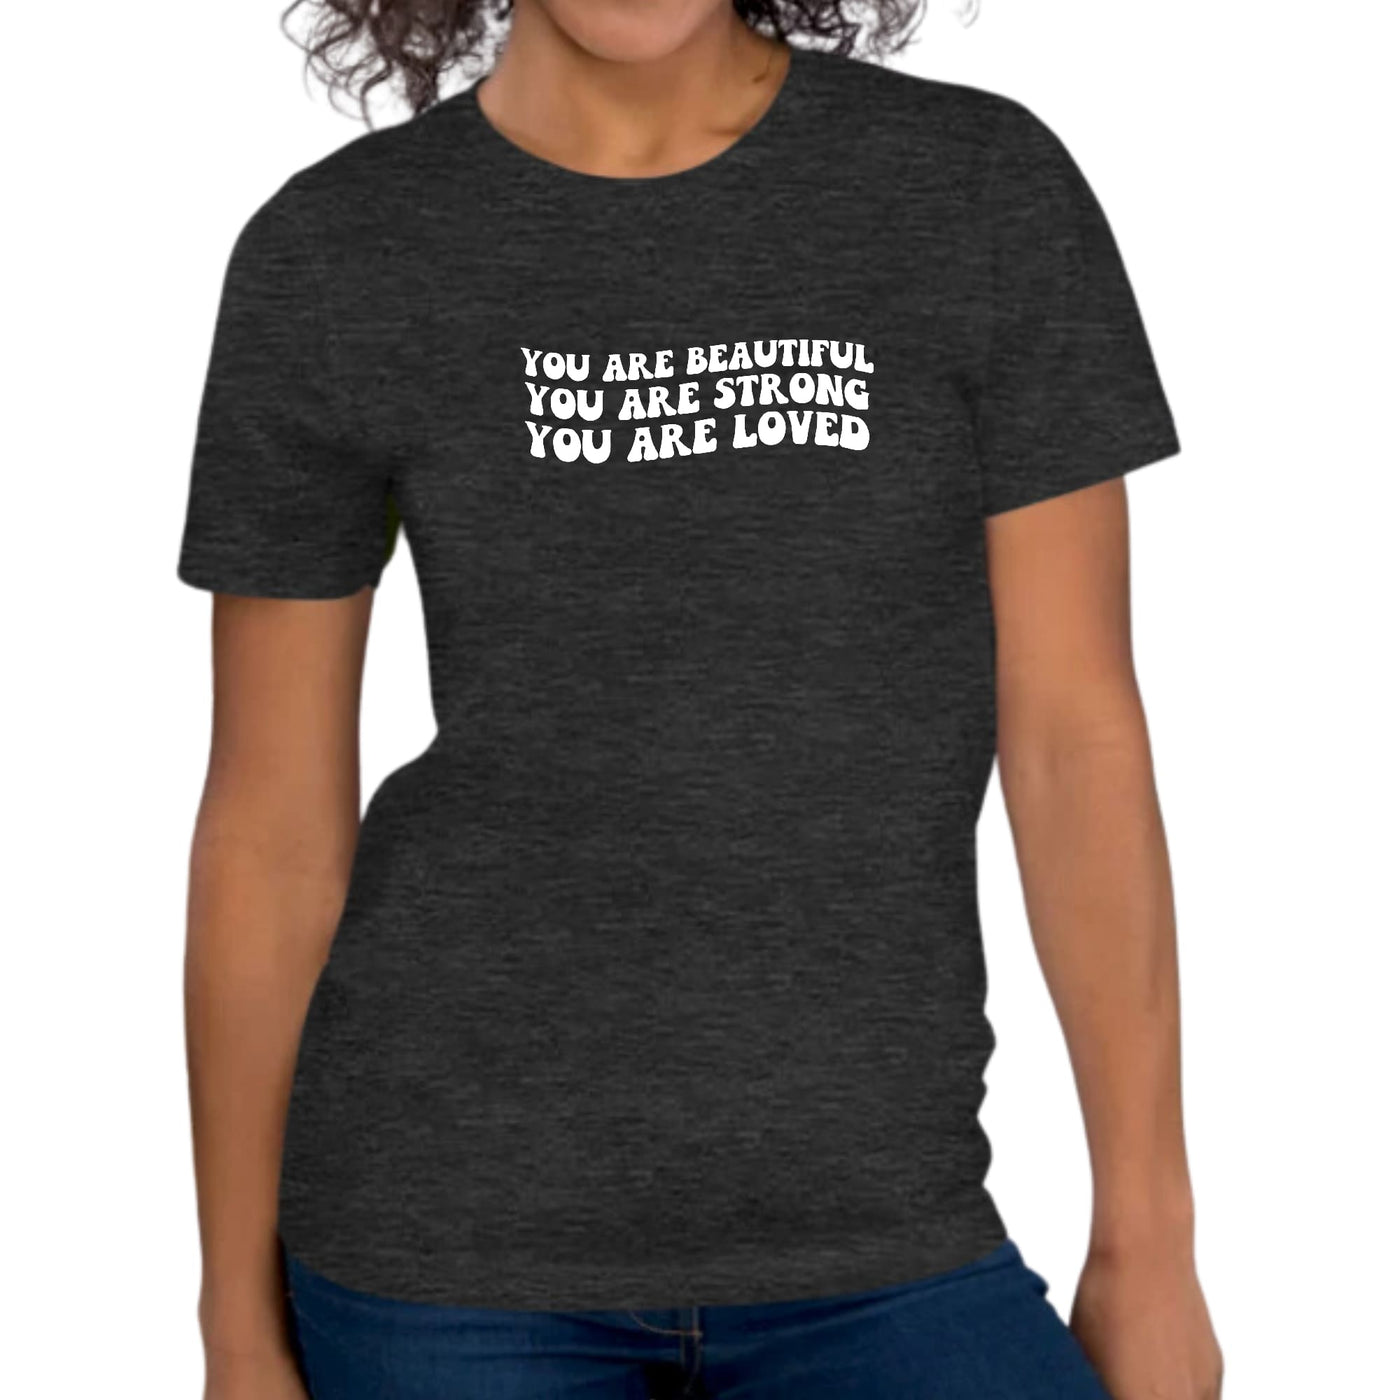 Womens Graphic T - shirt You Are Beautiful Strong Loved Inspiration - T - Shirts